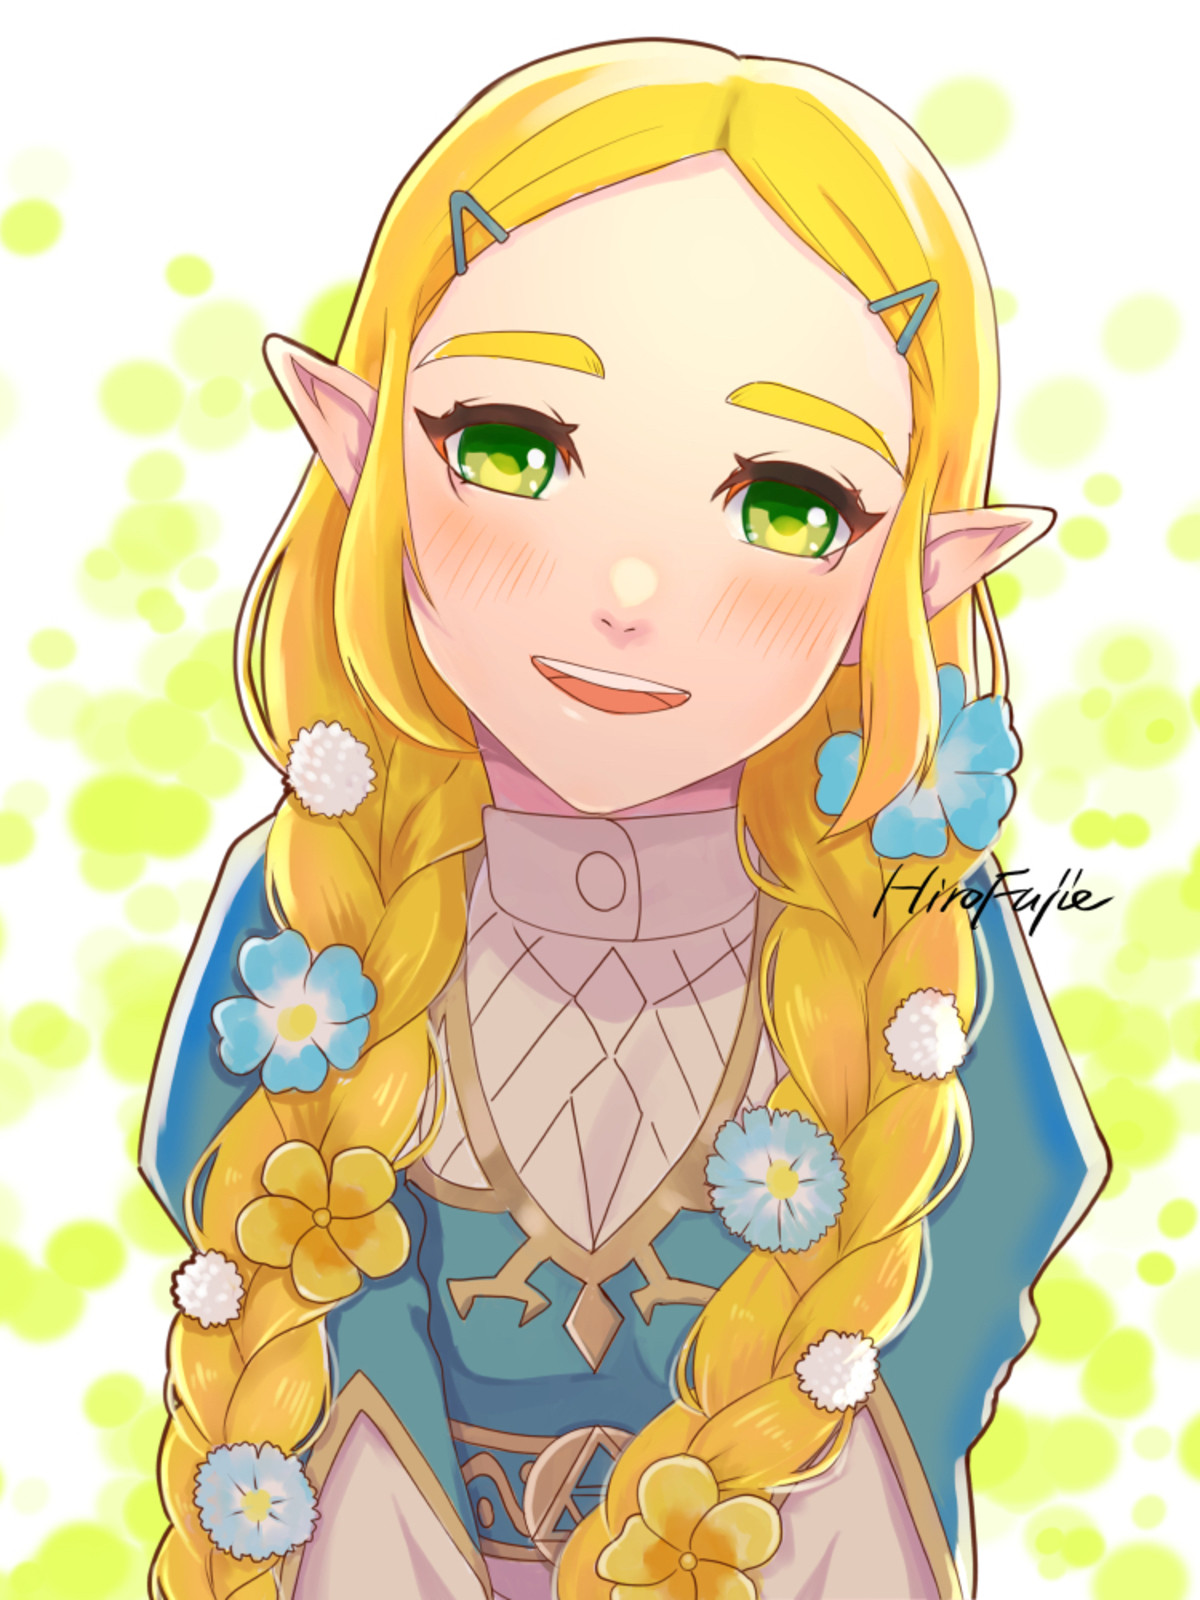 Daily Zelda - 1081: Flowers in her hair. join list: DailyZelda (524 subs)Mention History Source: .